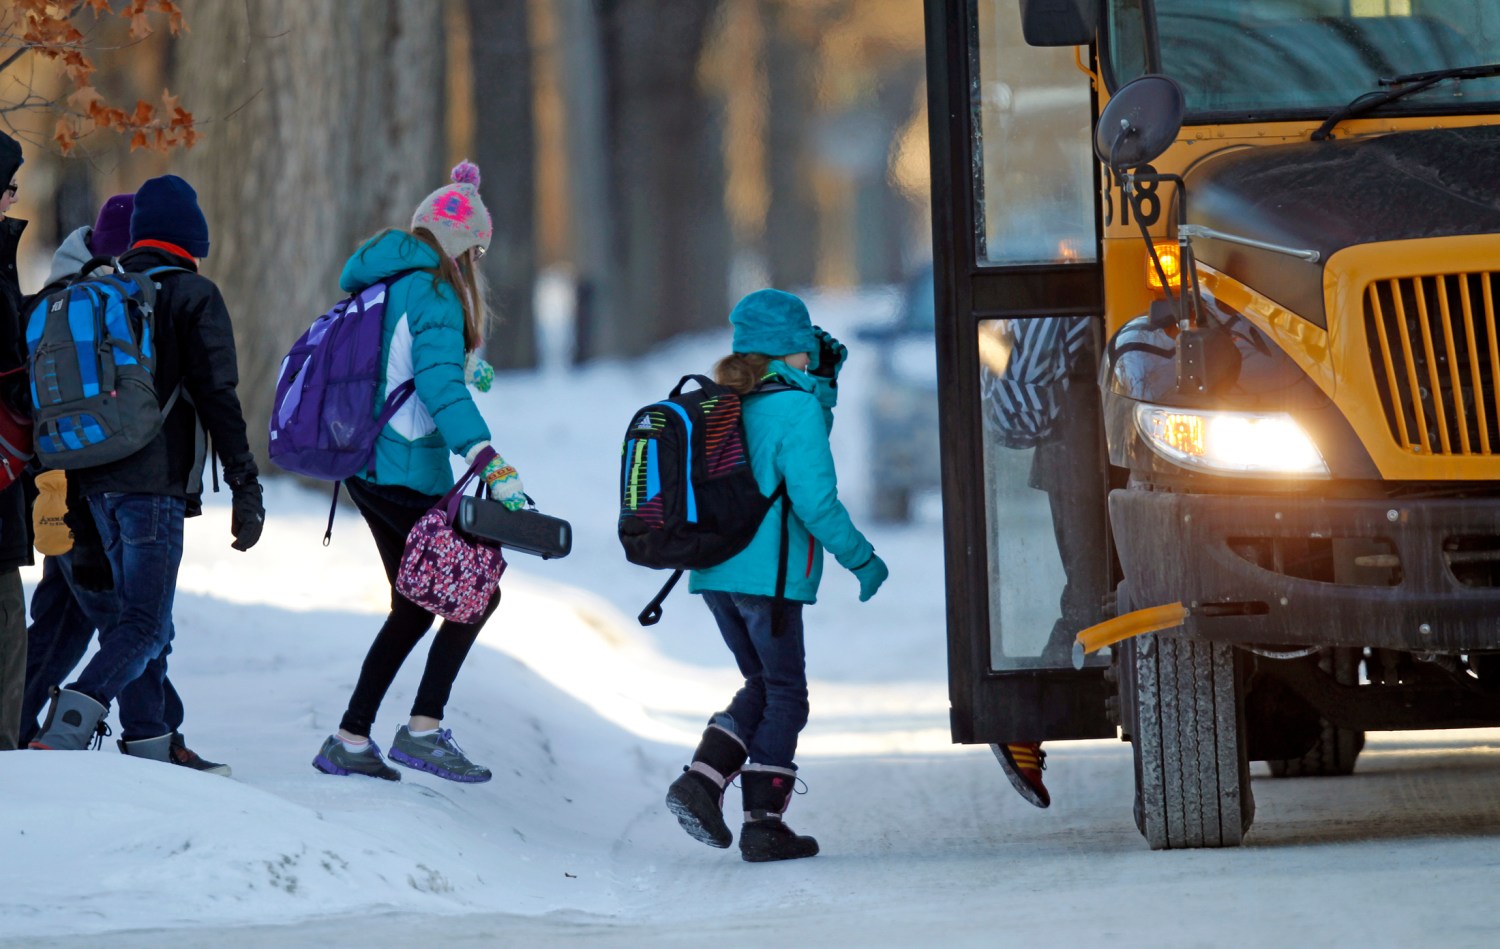 Students board their school bus in a sub-zero temperature in Minneapolis, January 8, 2014. A deadly blast of arctic air shattered decades-old temperature records as it enveloped the eastern United States on Tuesday, snarling air, road and rail travel, driving energy prices higher and overwhelming shelters for homeless people. According to AccuWeather.com, the extreme cold won't last much longer. The frigid air and "polar vortex" that affected about 240 million people in the United States and southern Canada will depart during the second half of this week, and a far-reaching January thaw will begin, according to AccuWeather.com.  REUTERS/Eric Miller (UNITED STATES - Tags: ENVIRONMENT EDUCATION) - GM1EA190G4I01